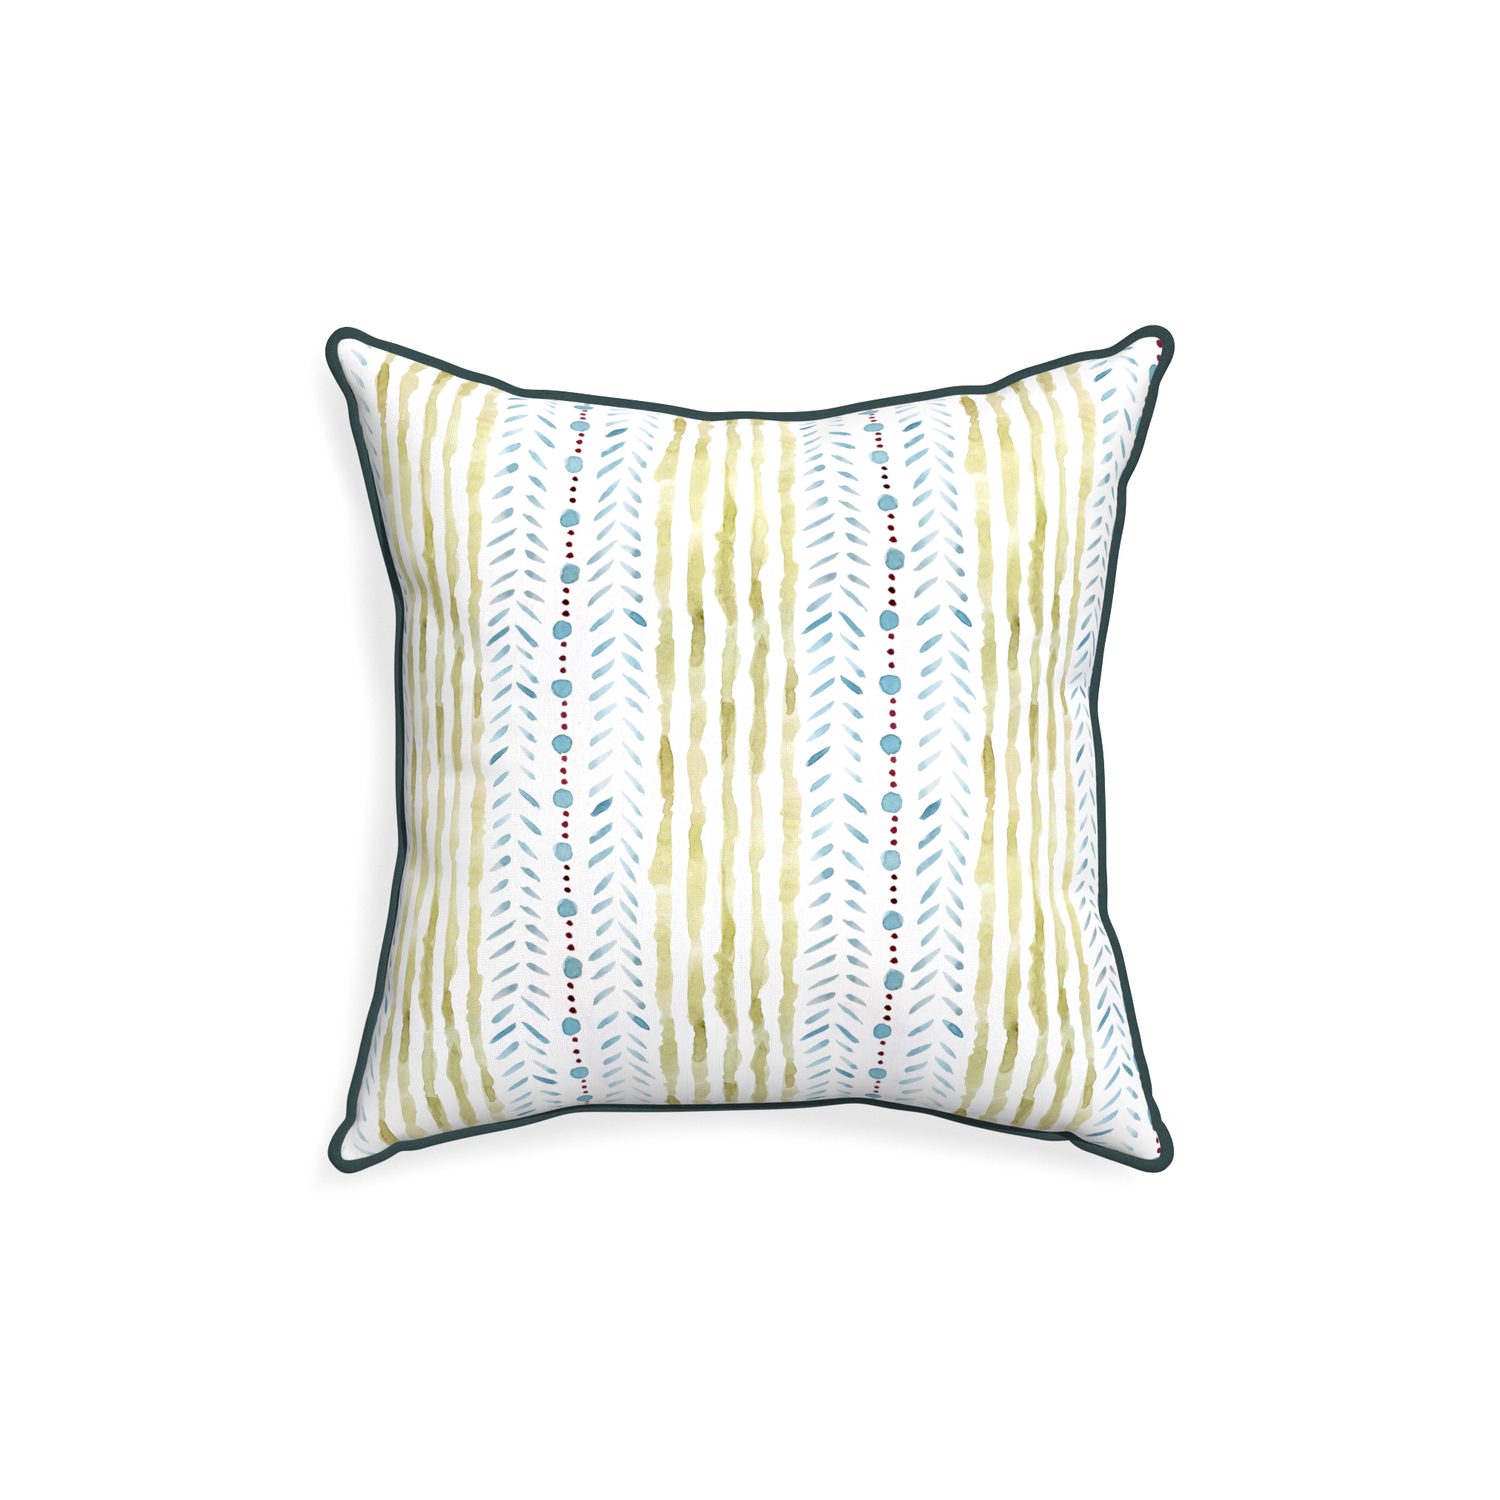 18-square julia custom blue & green stripedpillow with p piping on white background